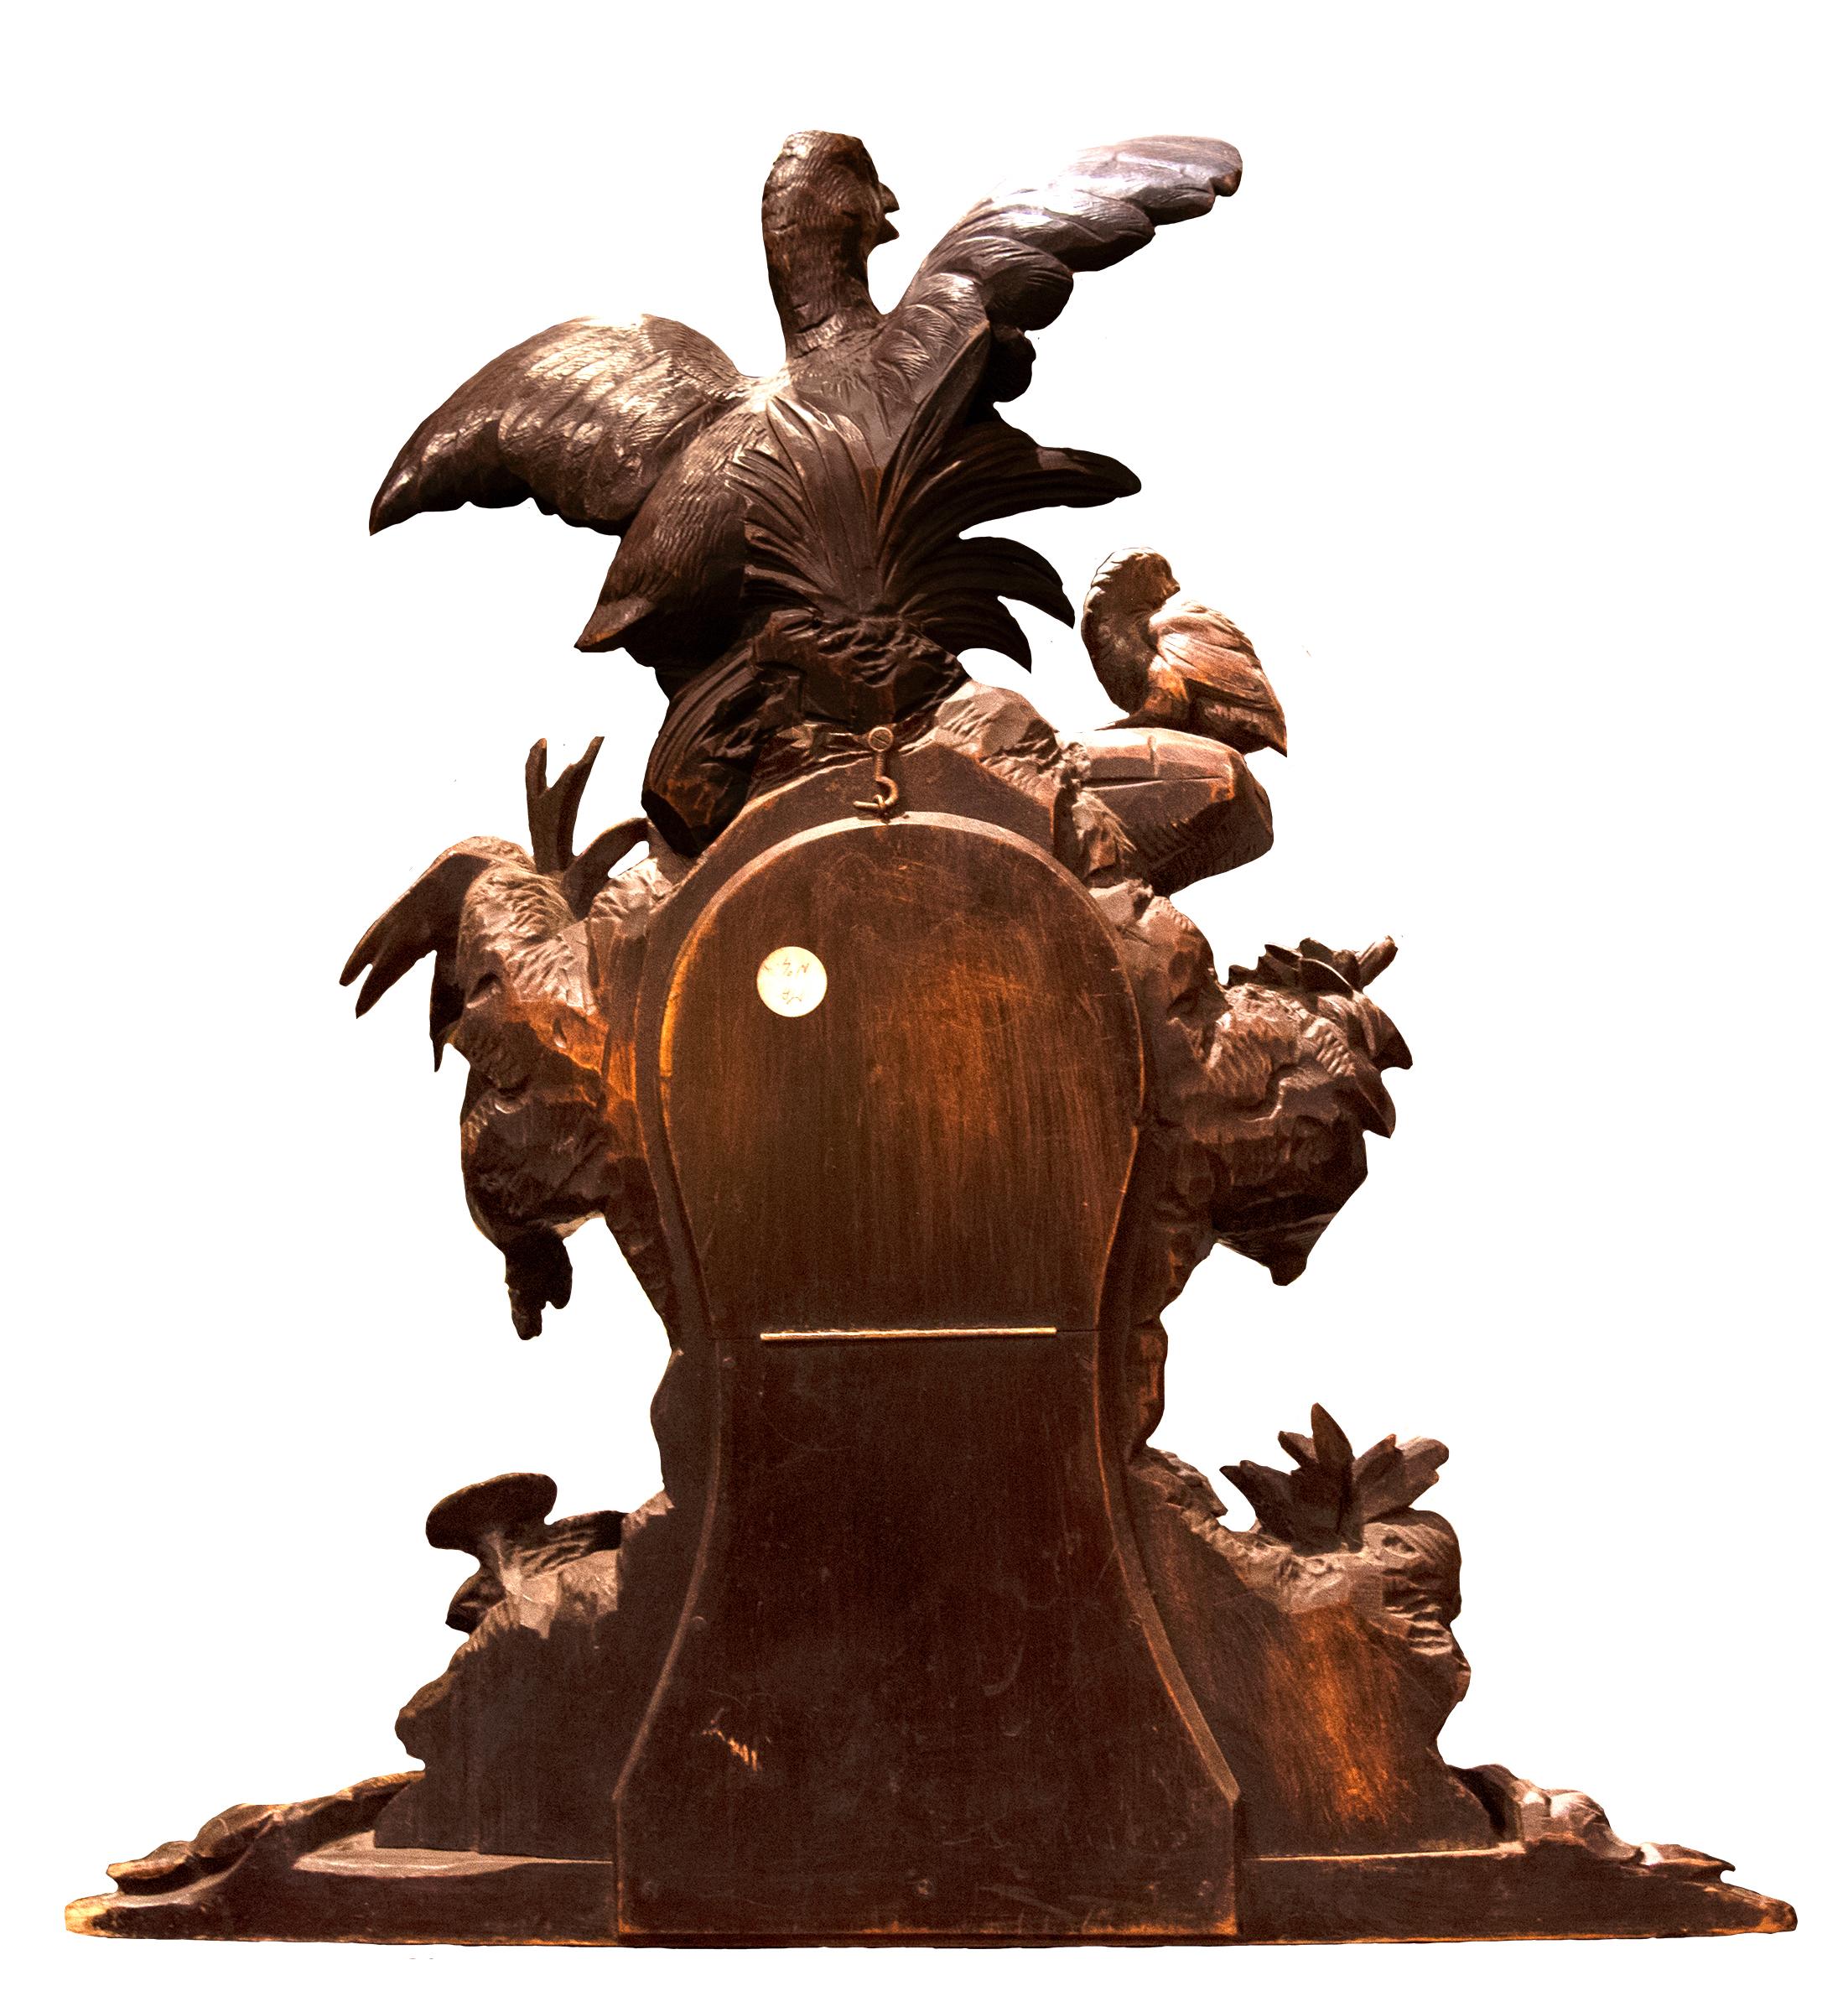 A nineteenth-century Swiss clock decorated with foliage and a family of birds.

Carved walnut in the Black Forest style, popular in the late nineteenth century.